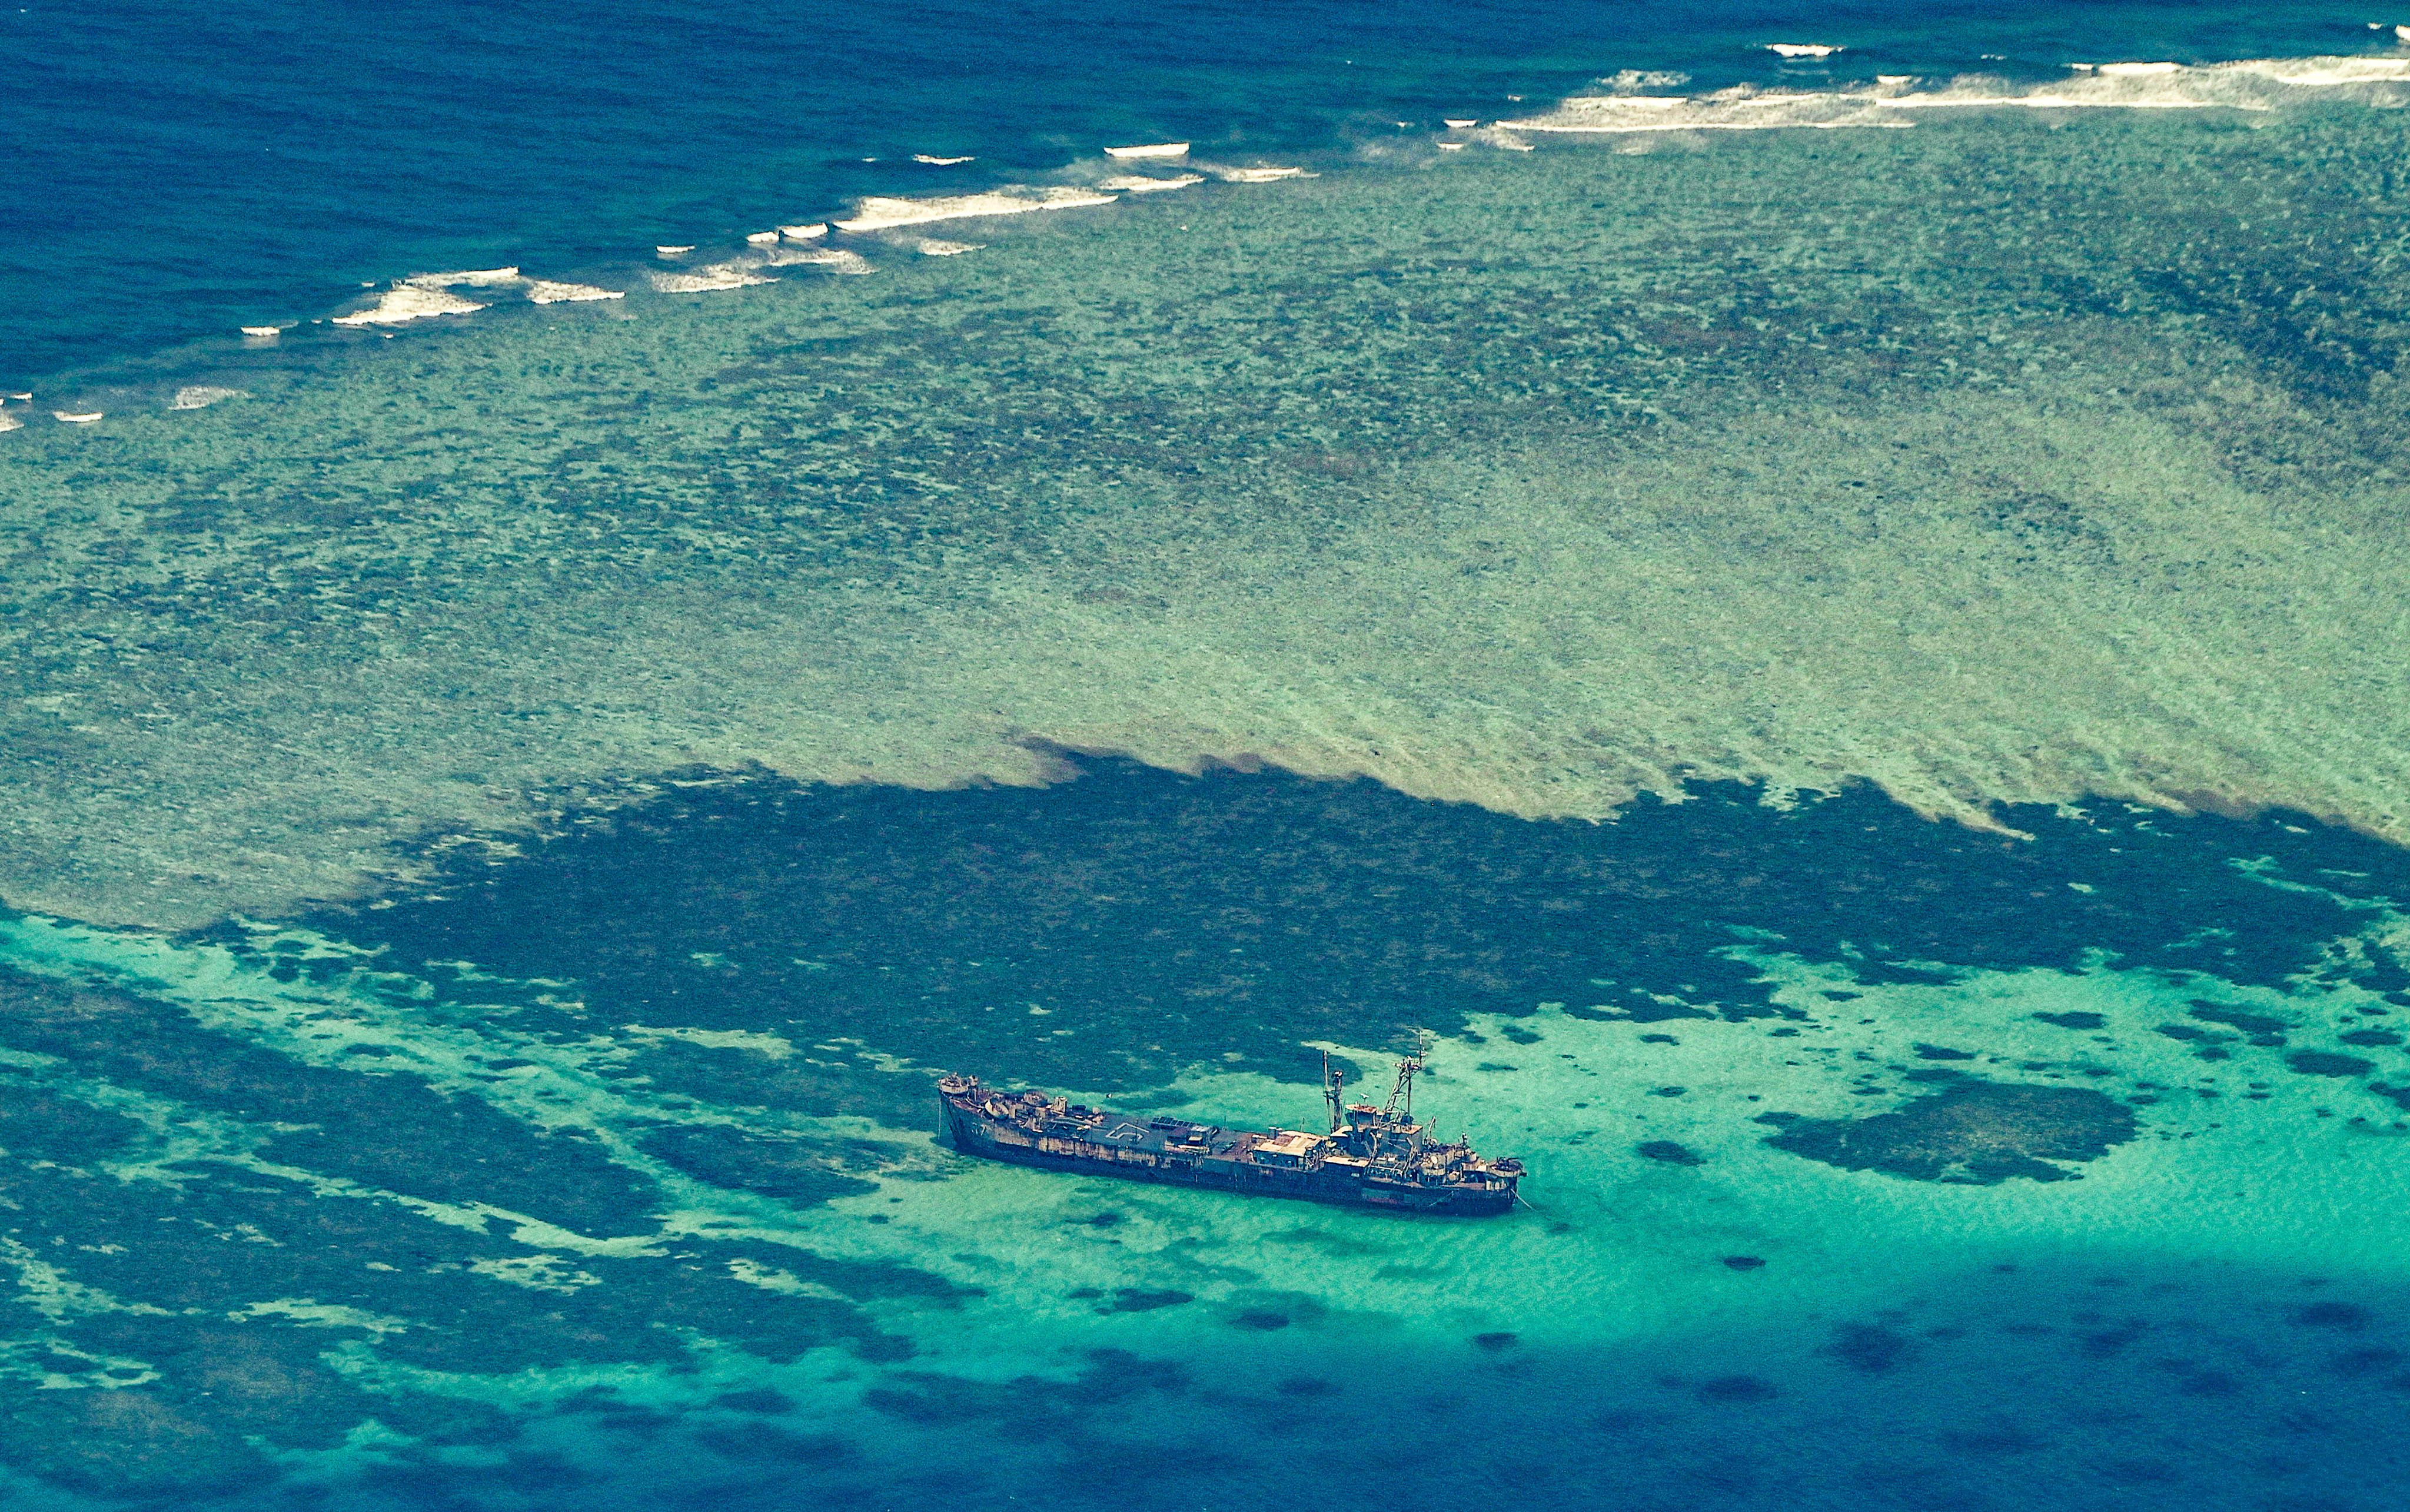 The grounded BRP Sierra Madre has become the focus of increasing tension between Beijing and Manila at Second Thomas Shoal in the South China Sea. Photo: AFP